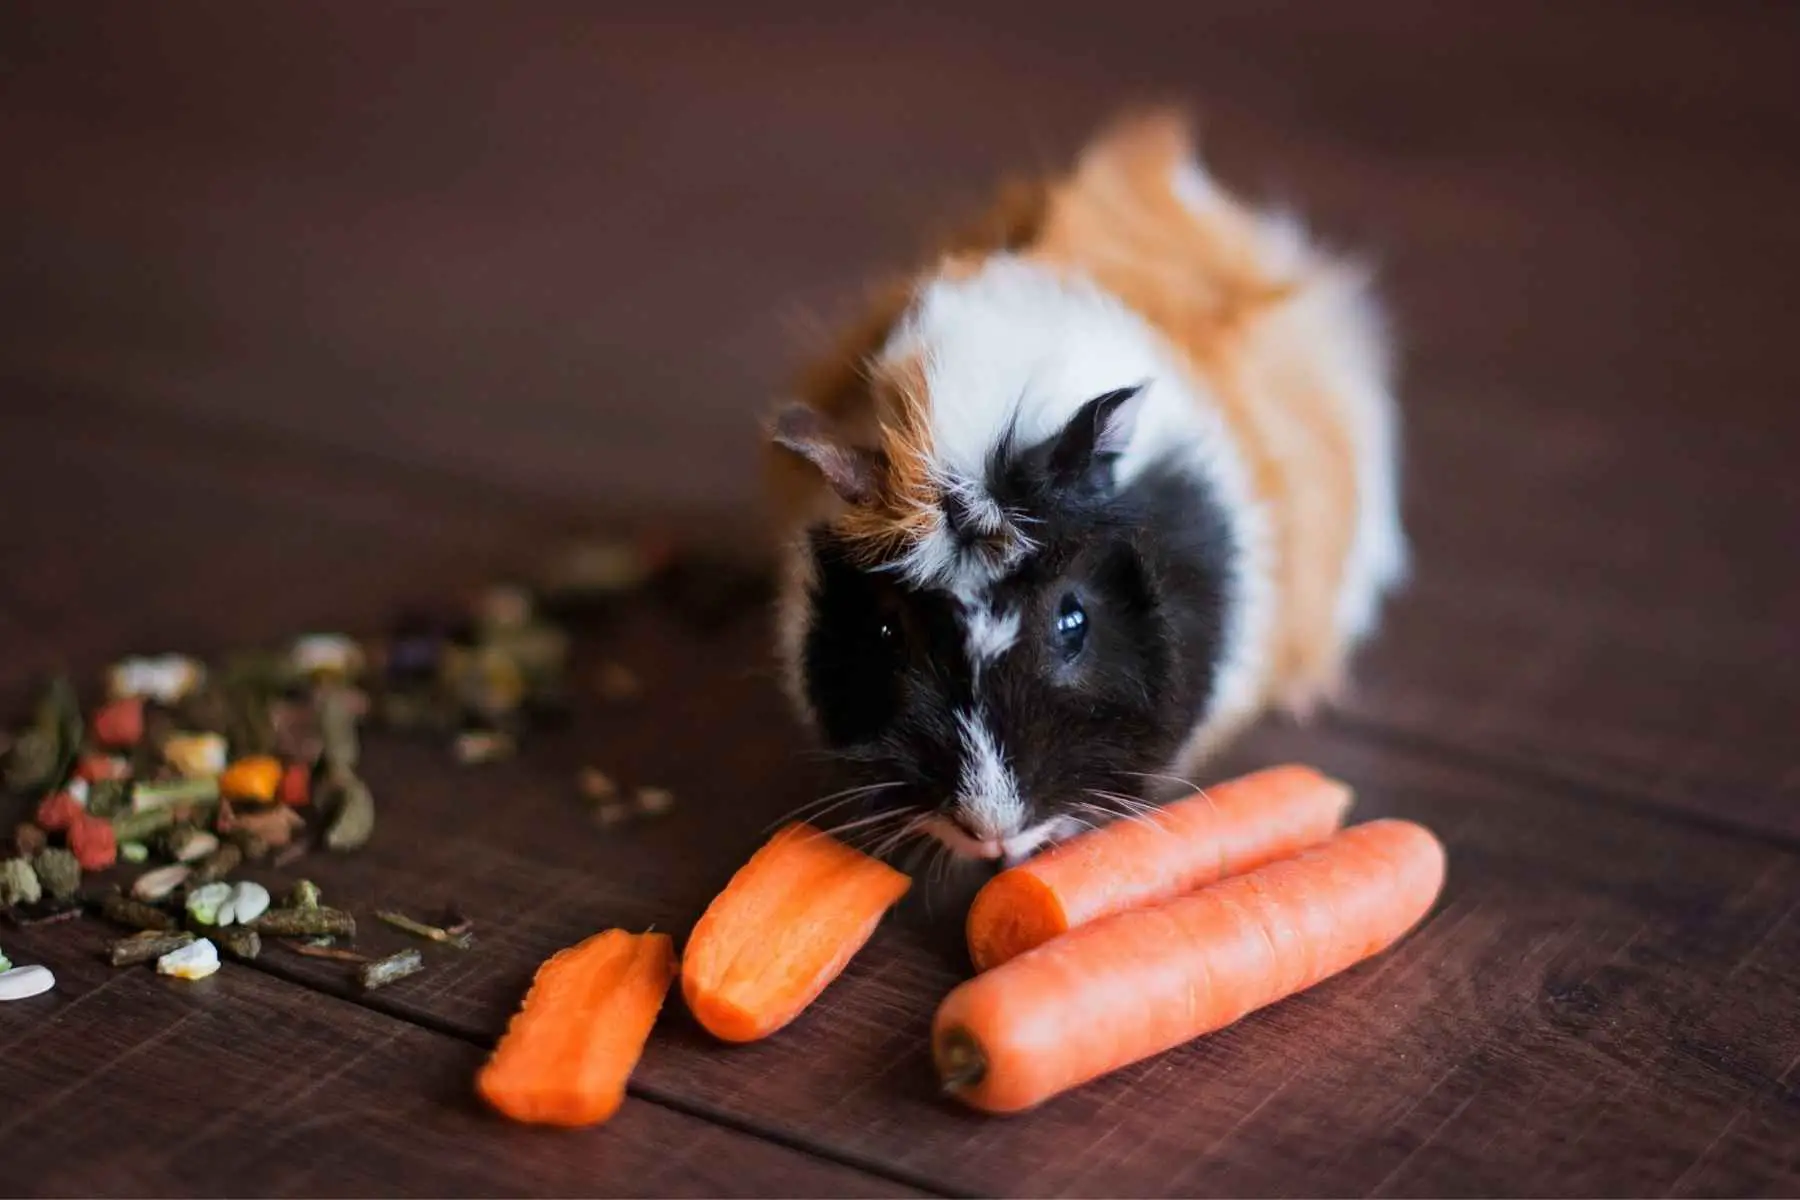 Guinea pig with different foods